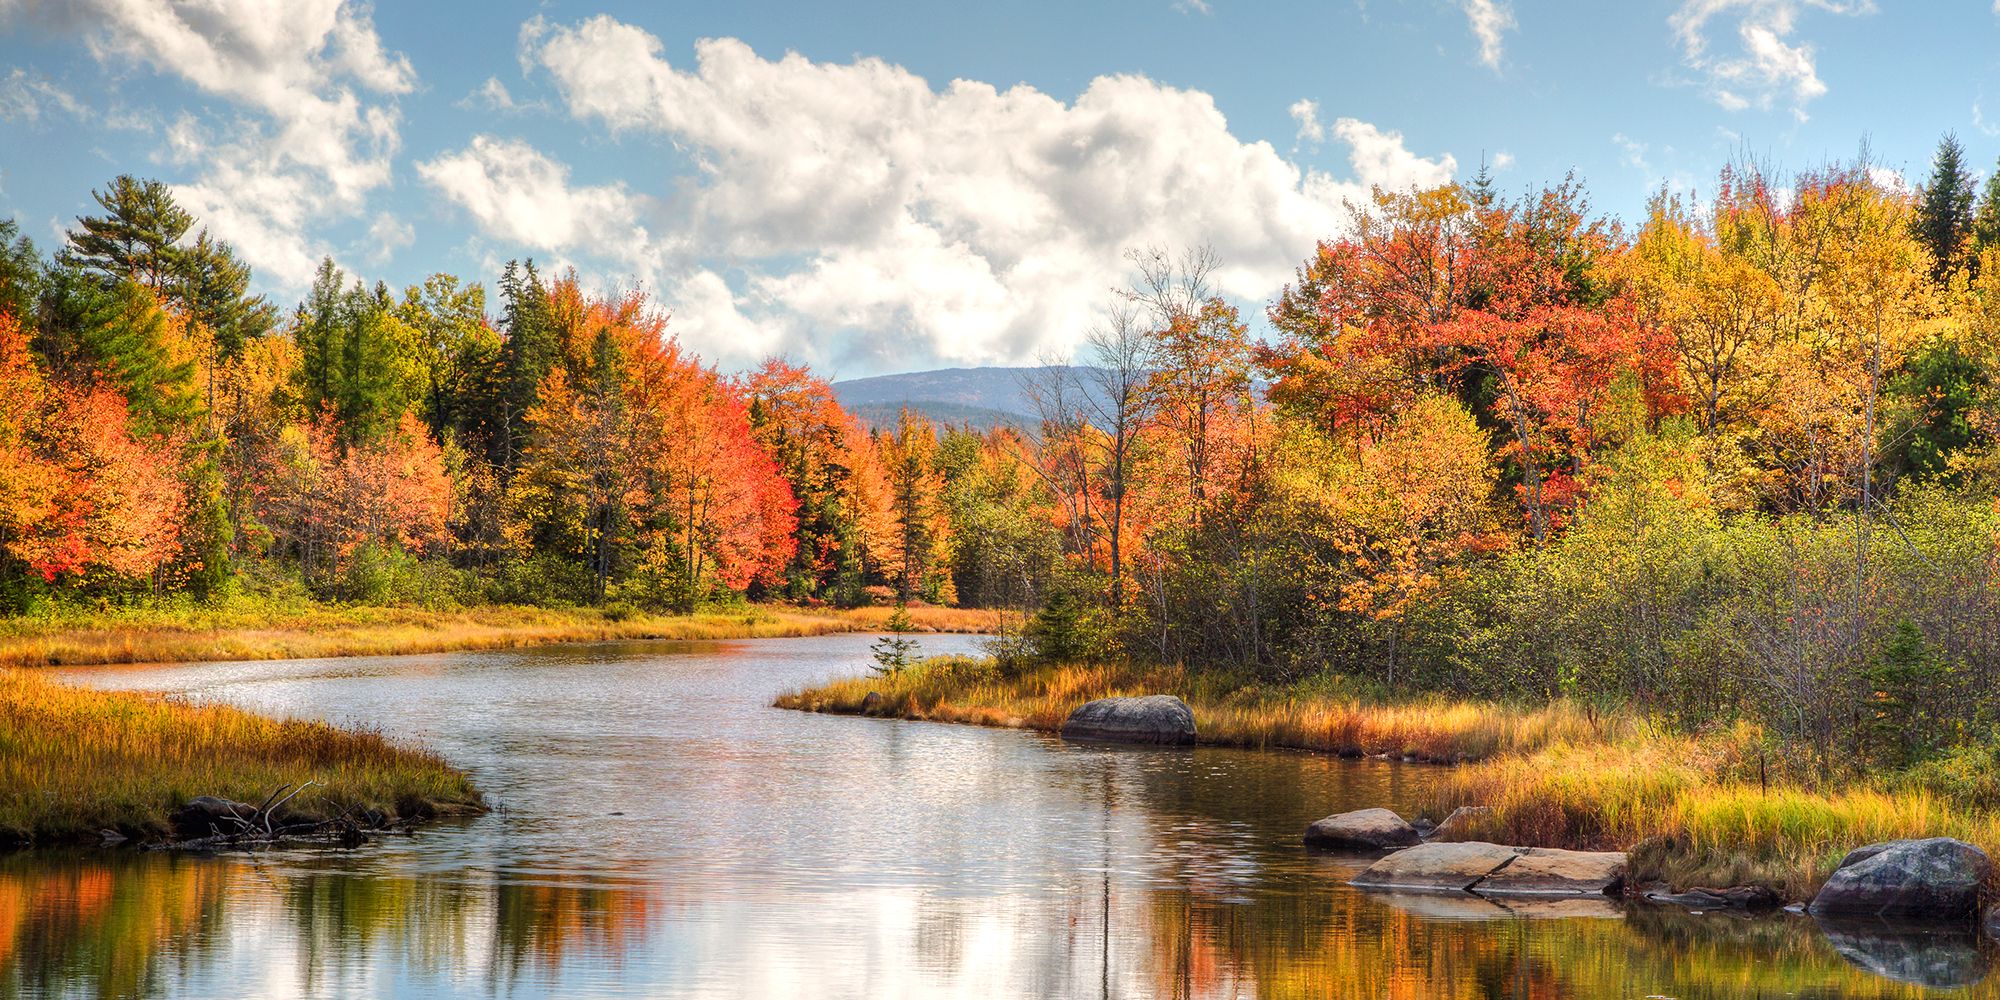 18 Best Fall Foliage Getaways in New England - Places to See Fall Foliage